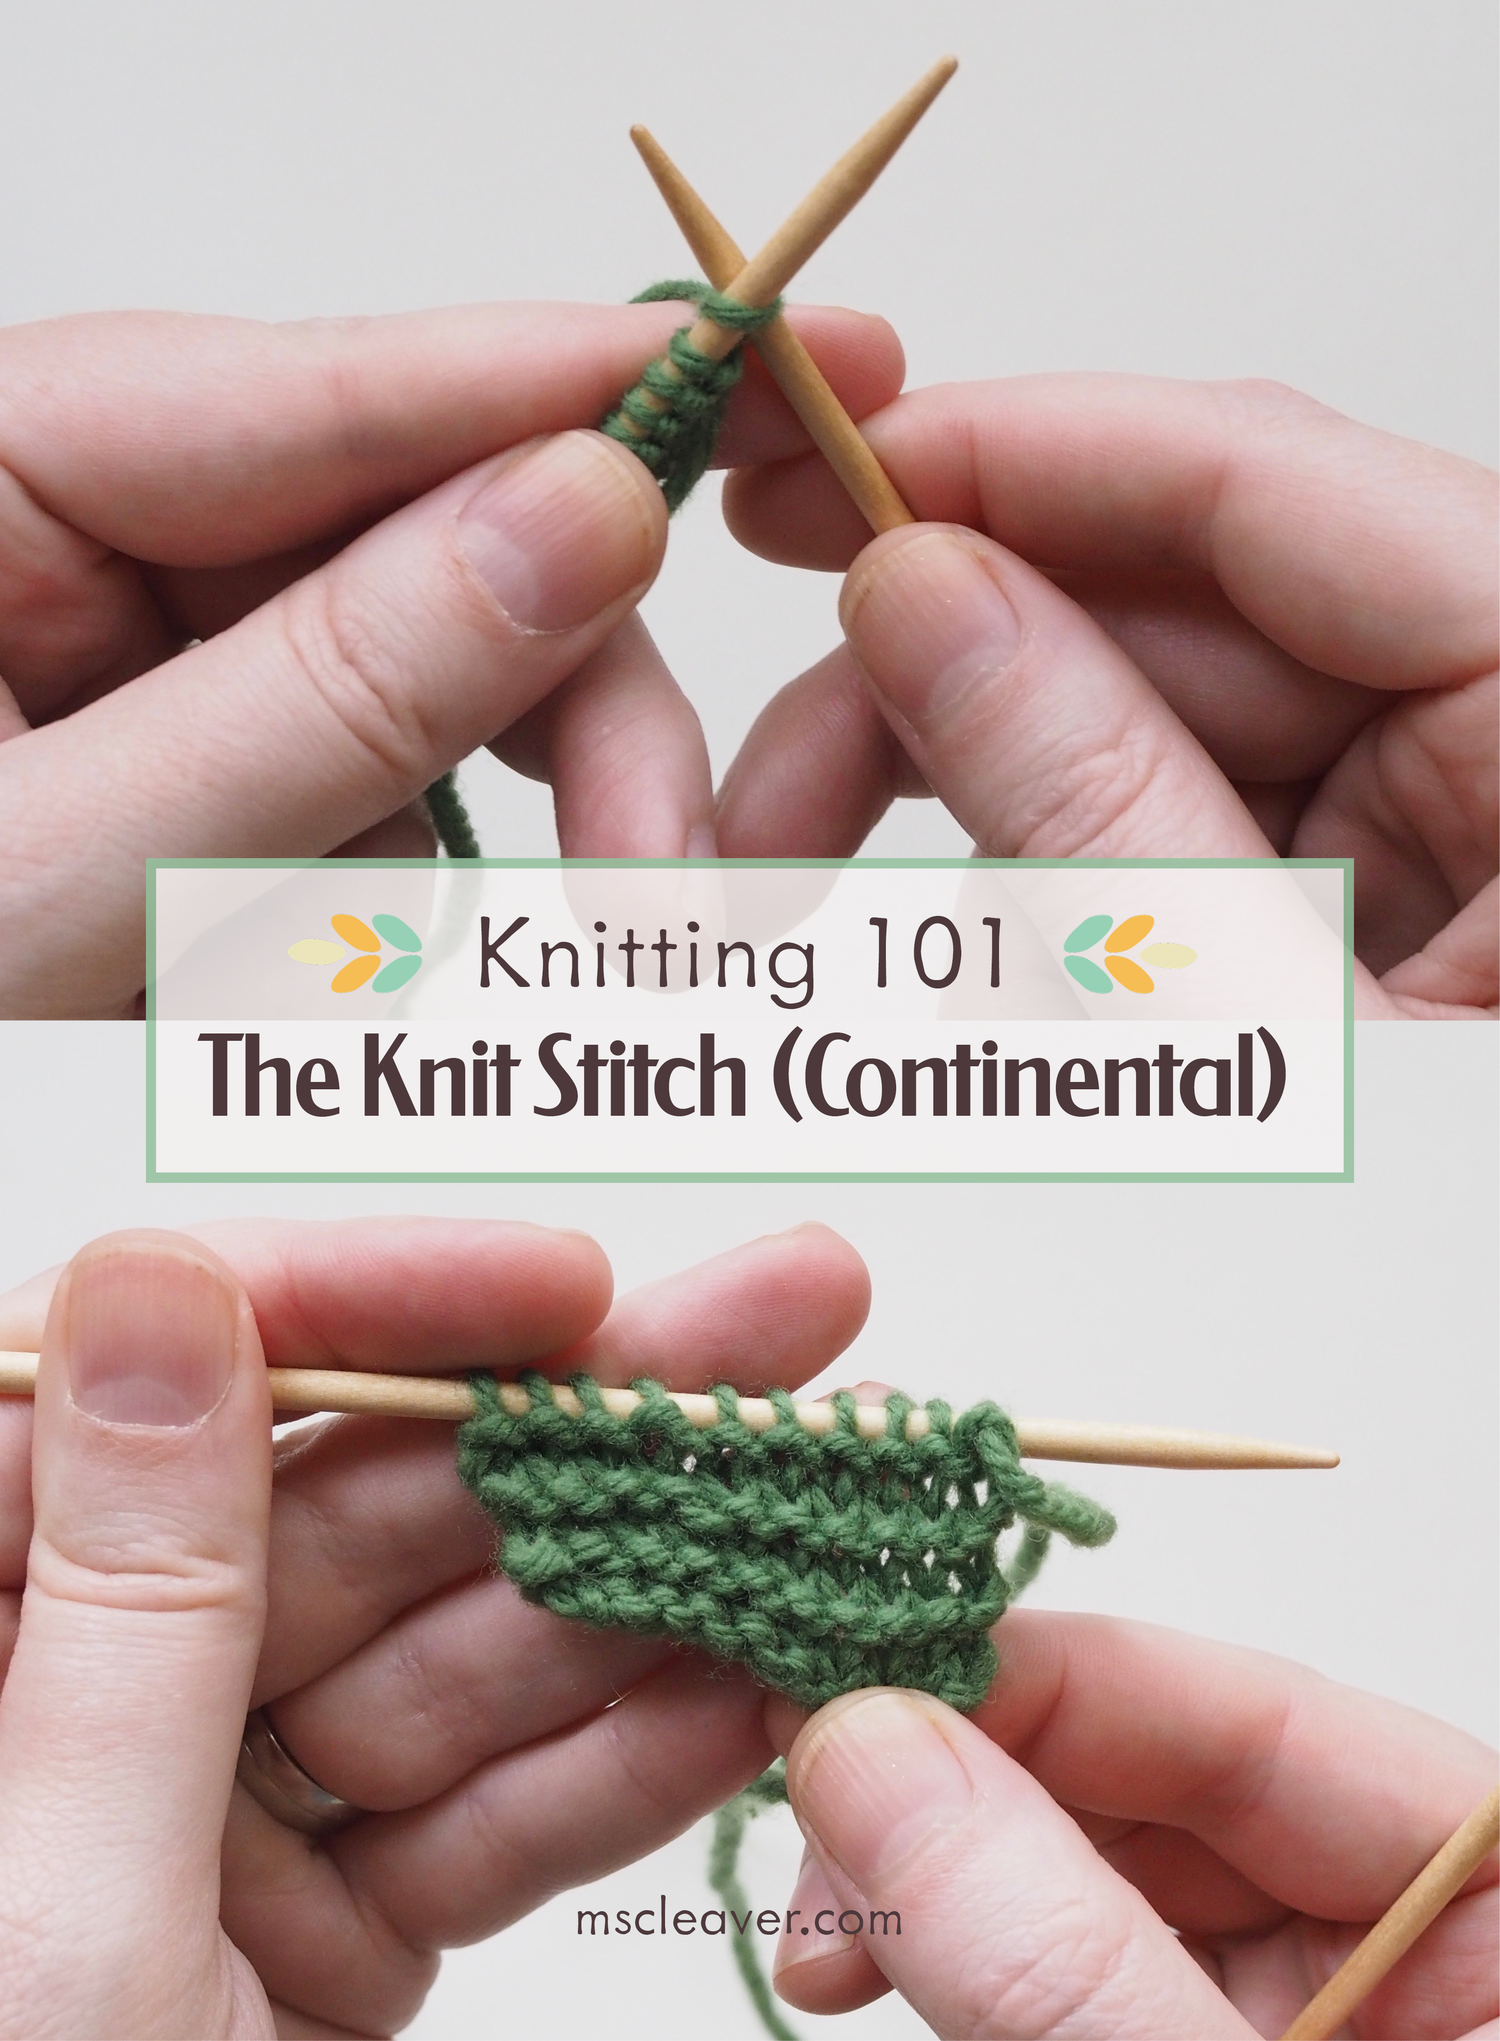 Difference between a Knit and Purl Stitch – Learn to Knit for